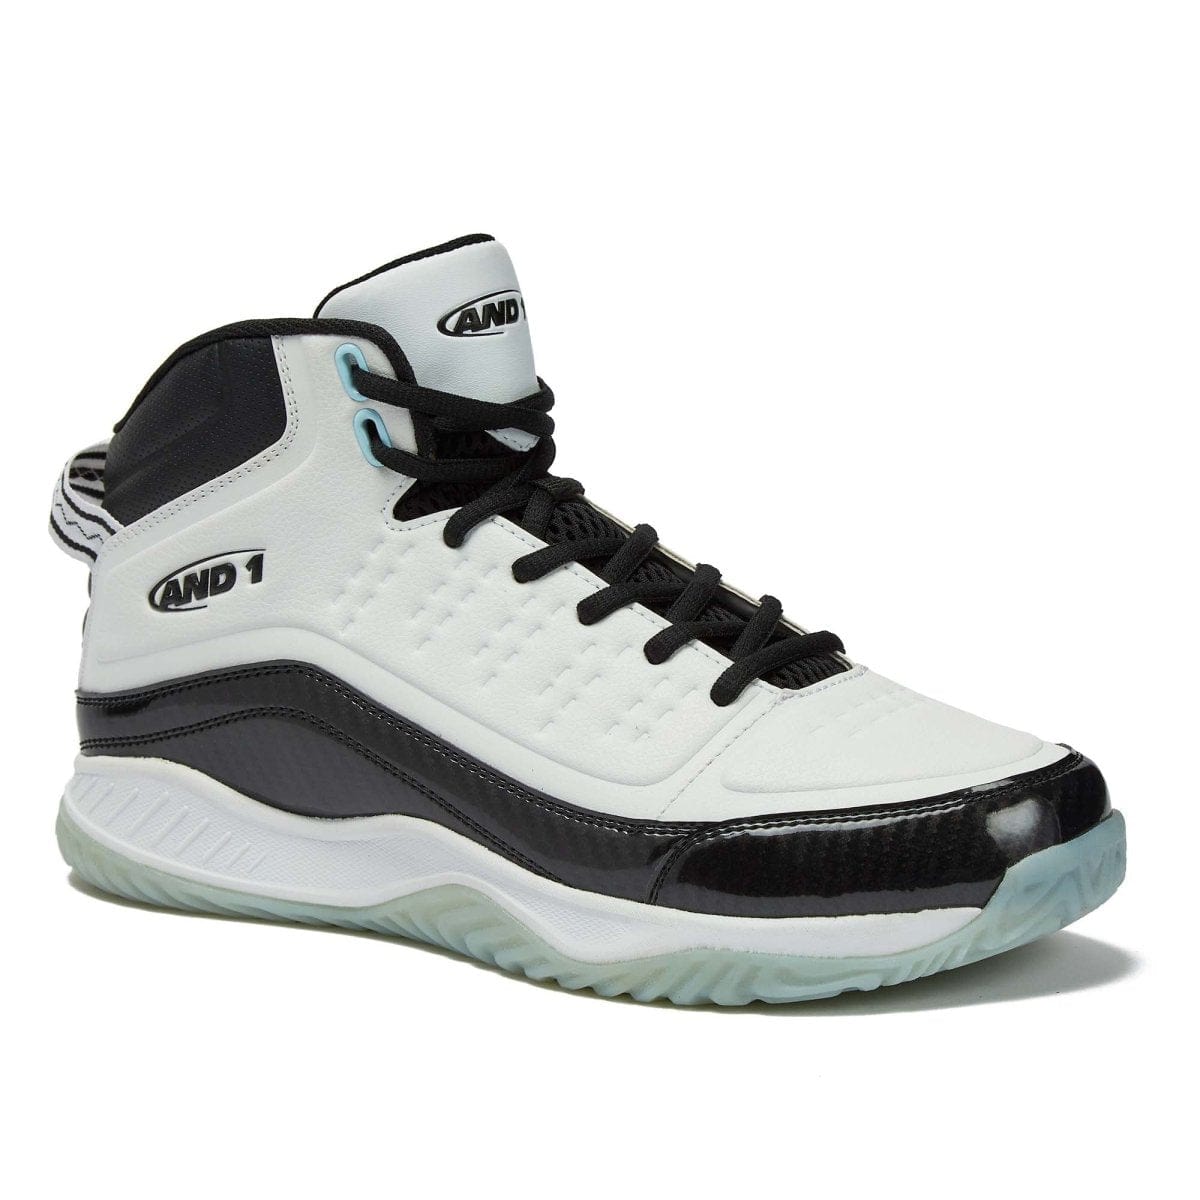 AND-1 AND1 MEN'S PULSE 2.0 WHITE/BLACK BASKETBALL SHOE - INSPORT